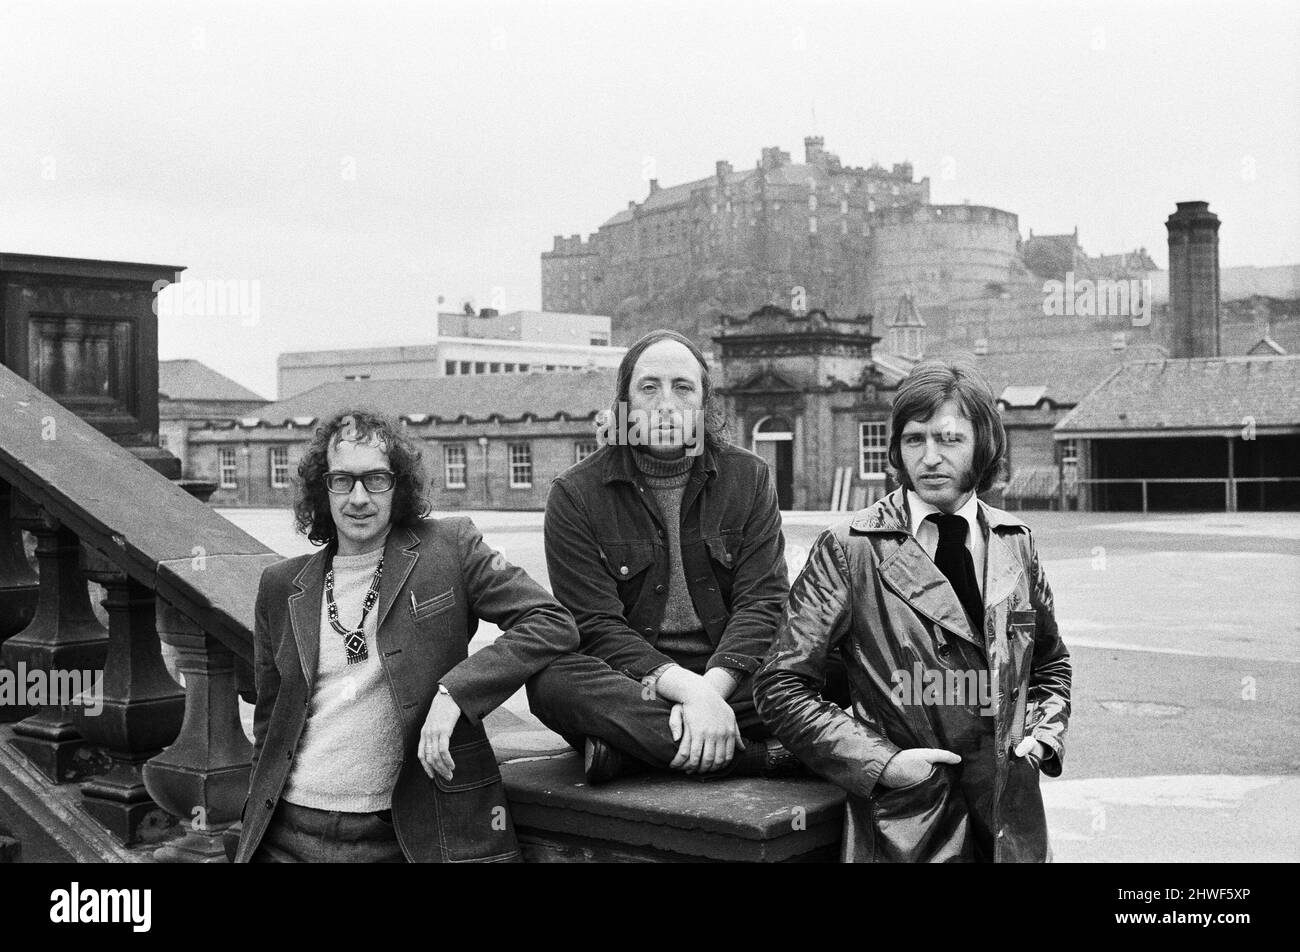 Liverpool pop group The Scaffold pictured in Edinburgh. From top: John Gorman, Roger McGough and Mike McGear (McCartney). 27th August 1969. Stock Photo